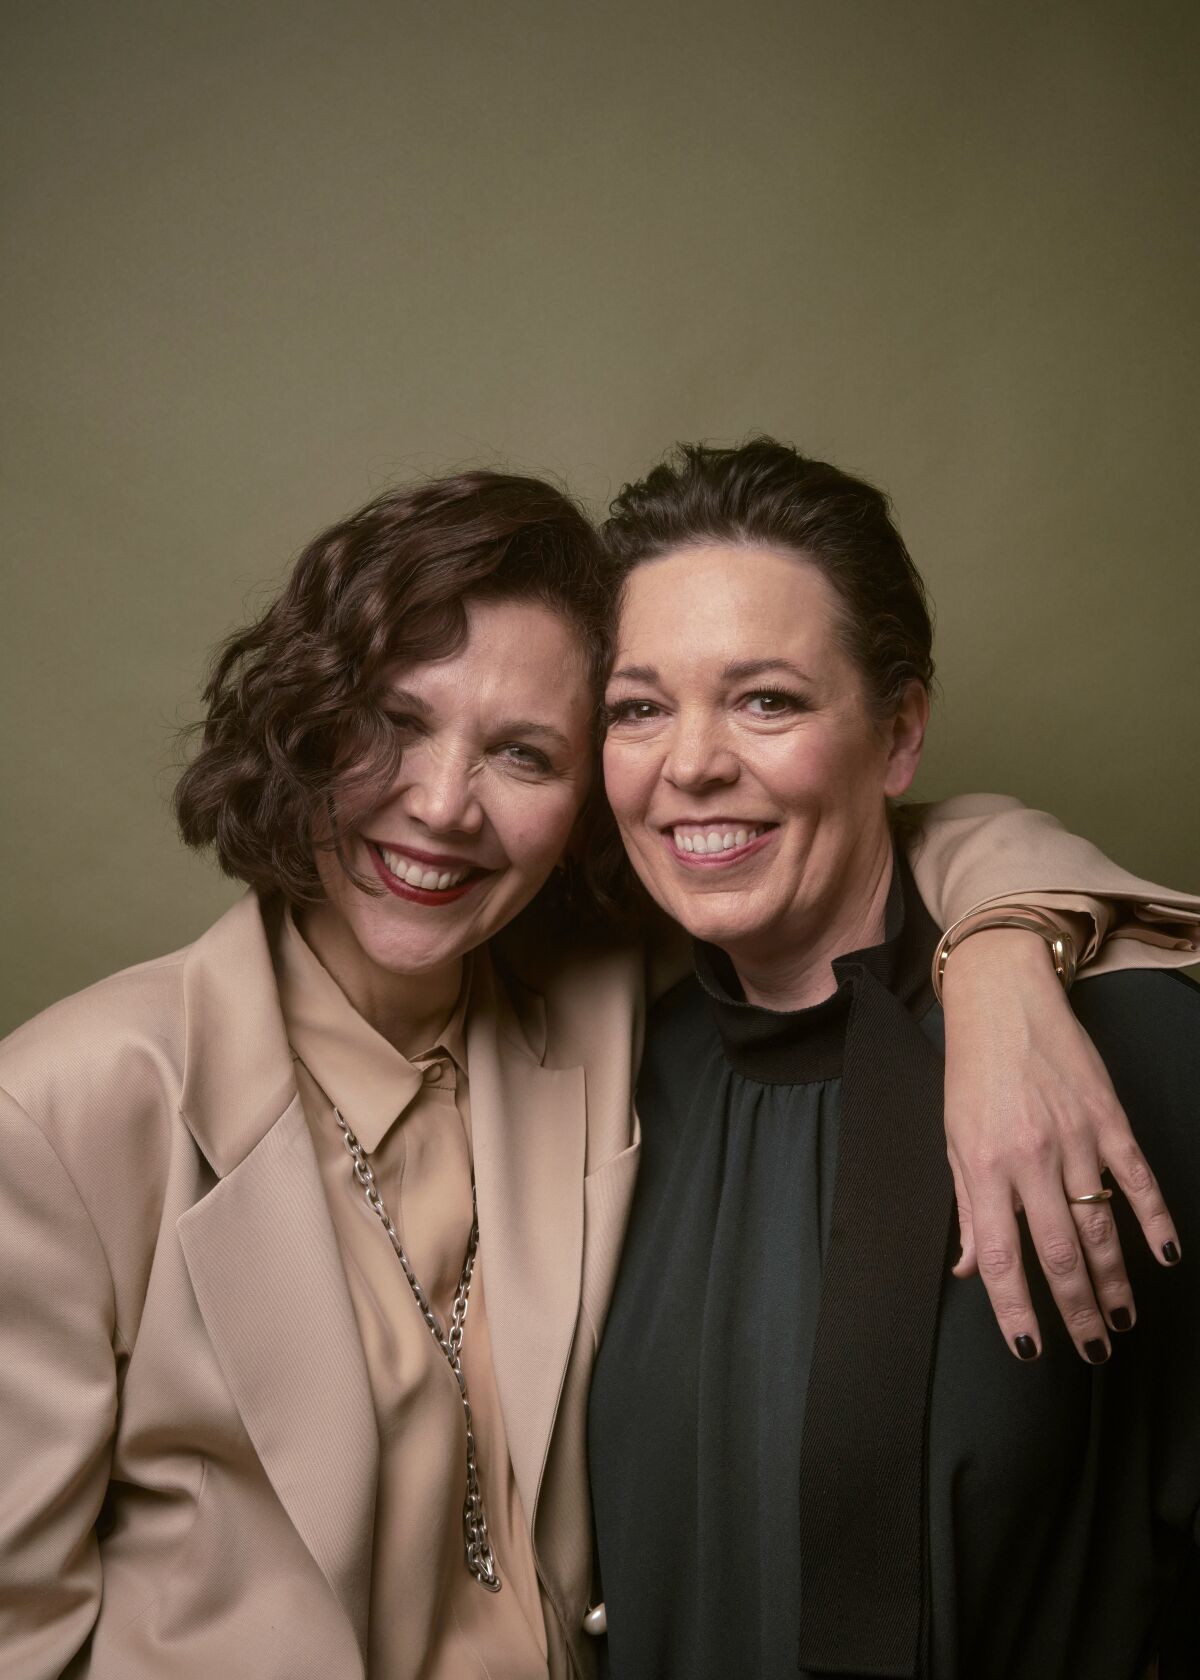 Two women put their heads together and smile for a portrait.